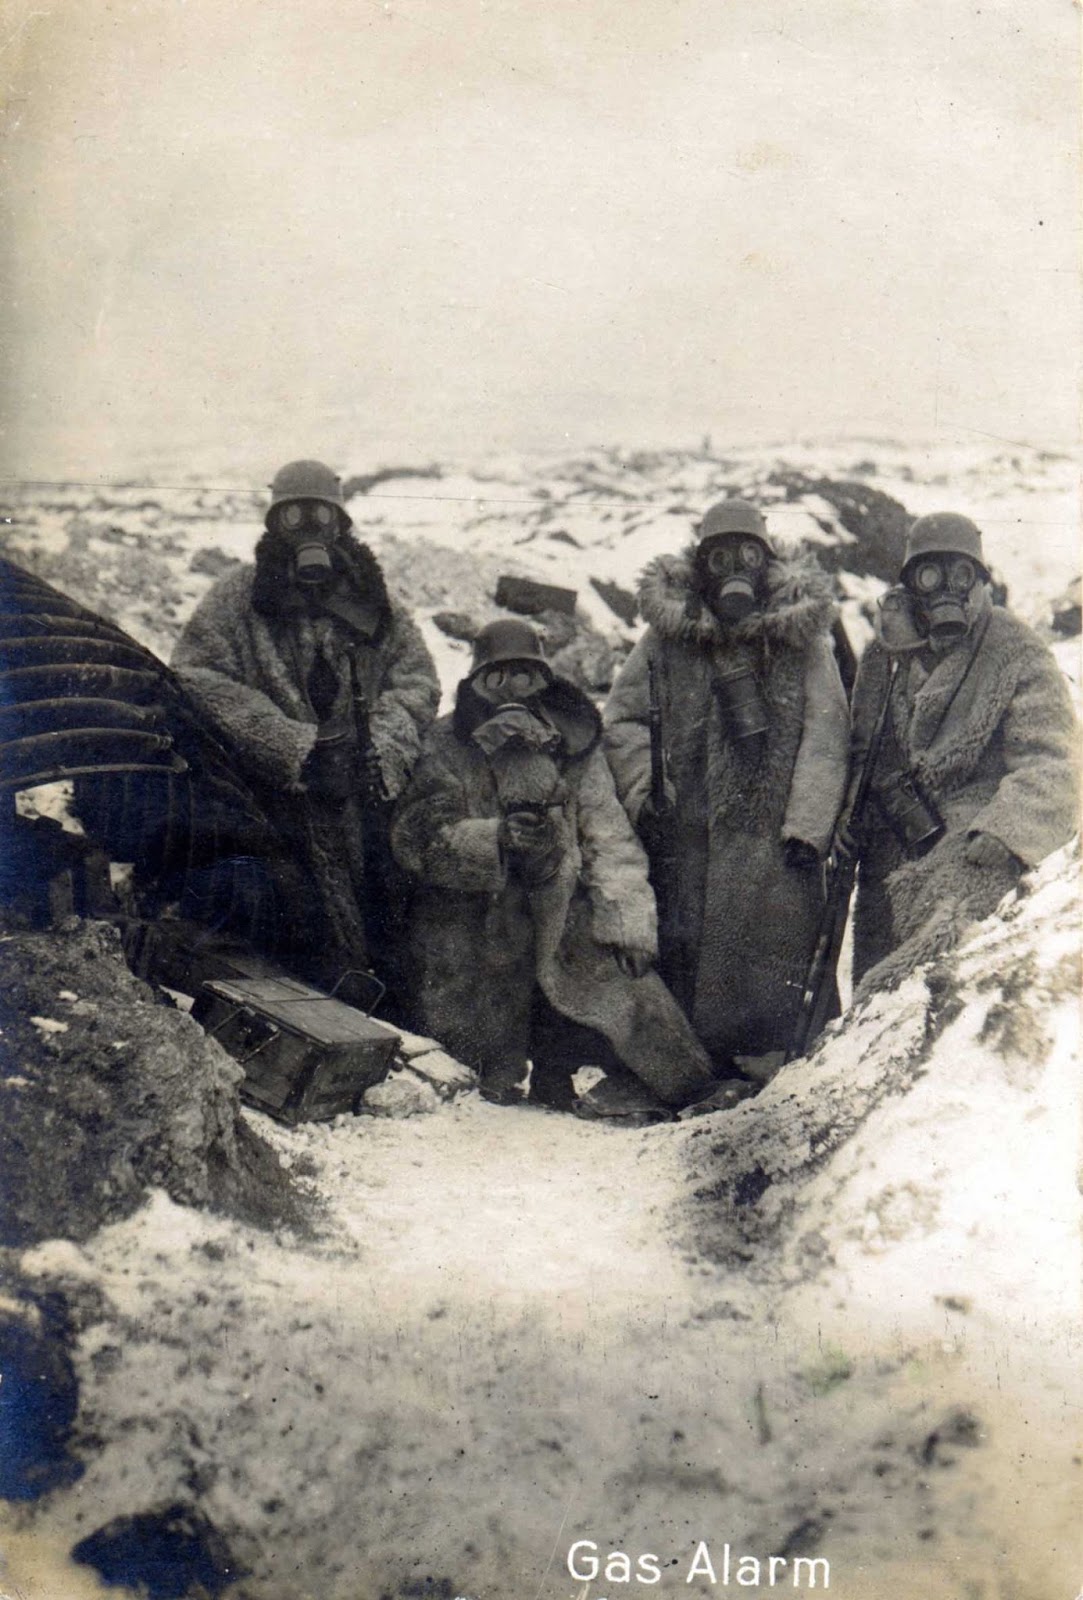 Four German Soldiers Wearing Fur Coats And Gas Masks In A Trench